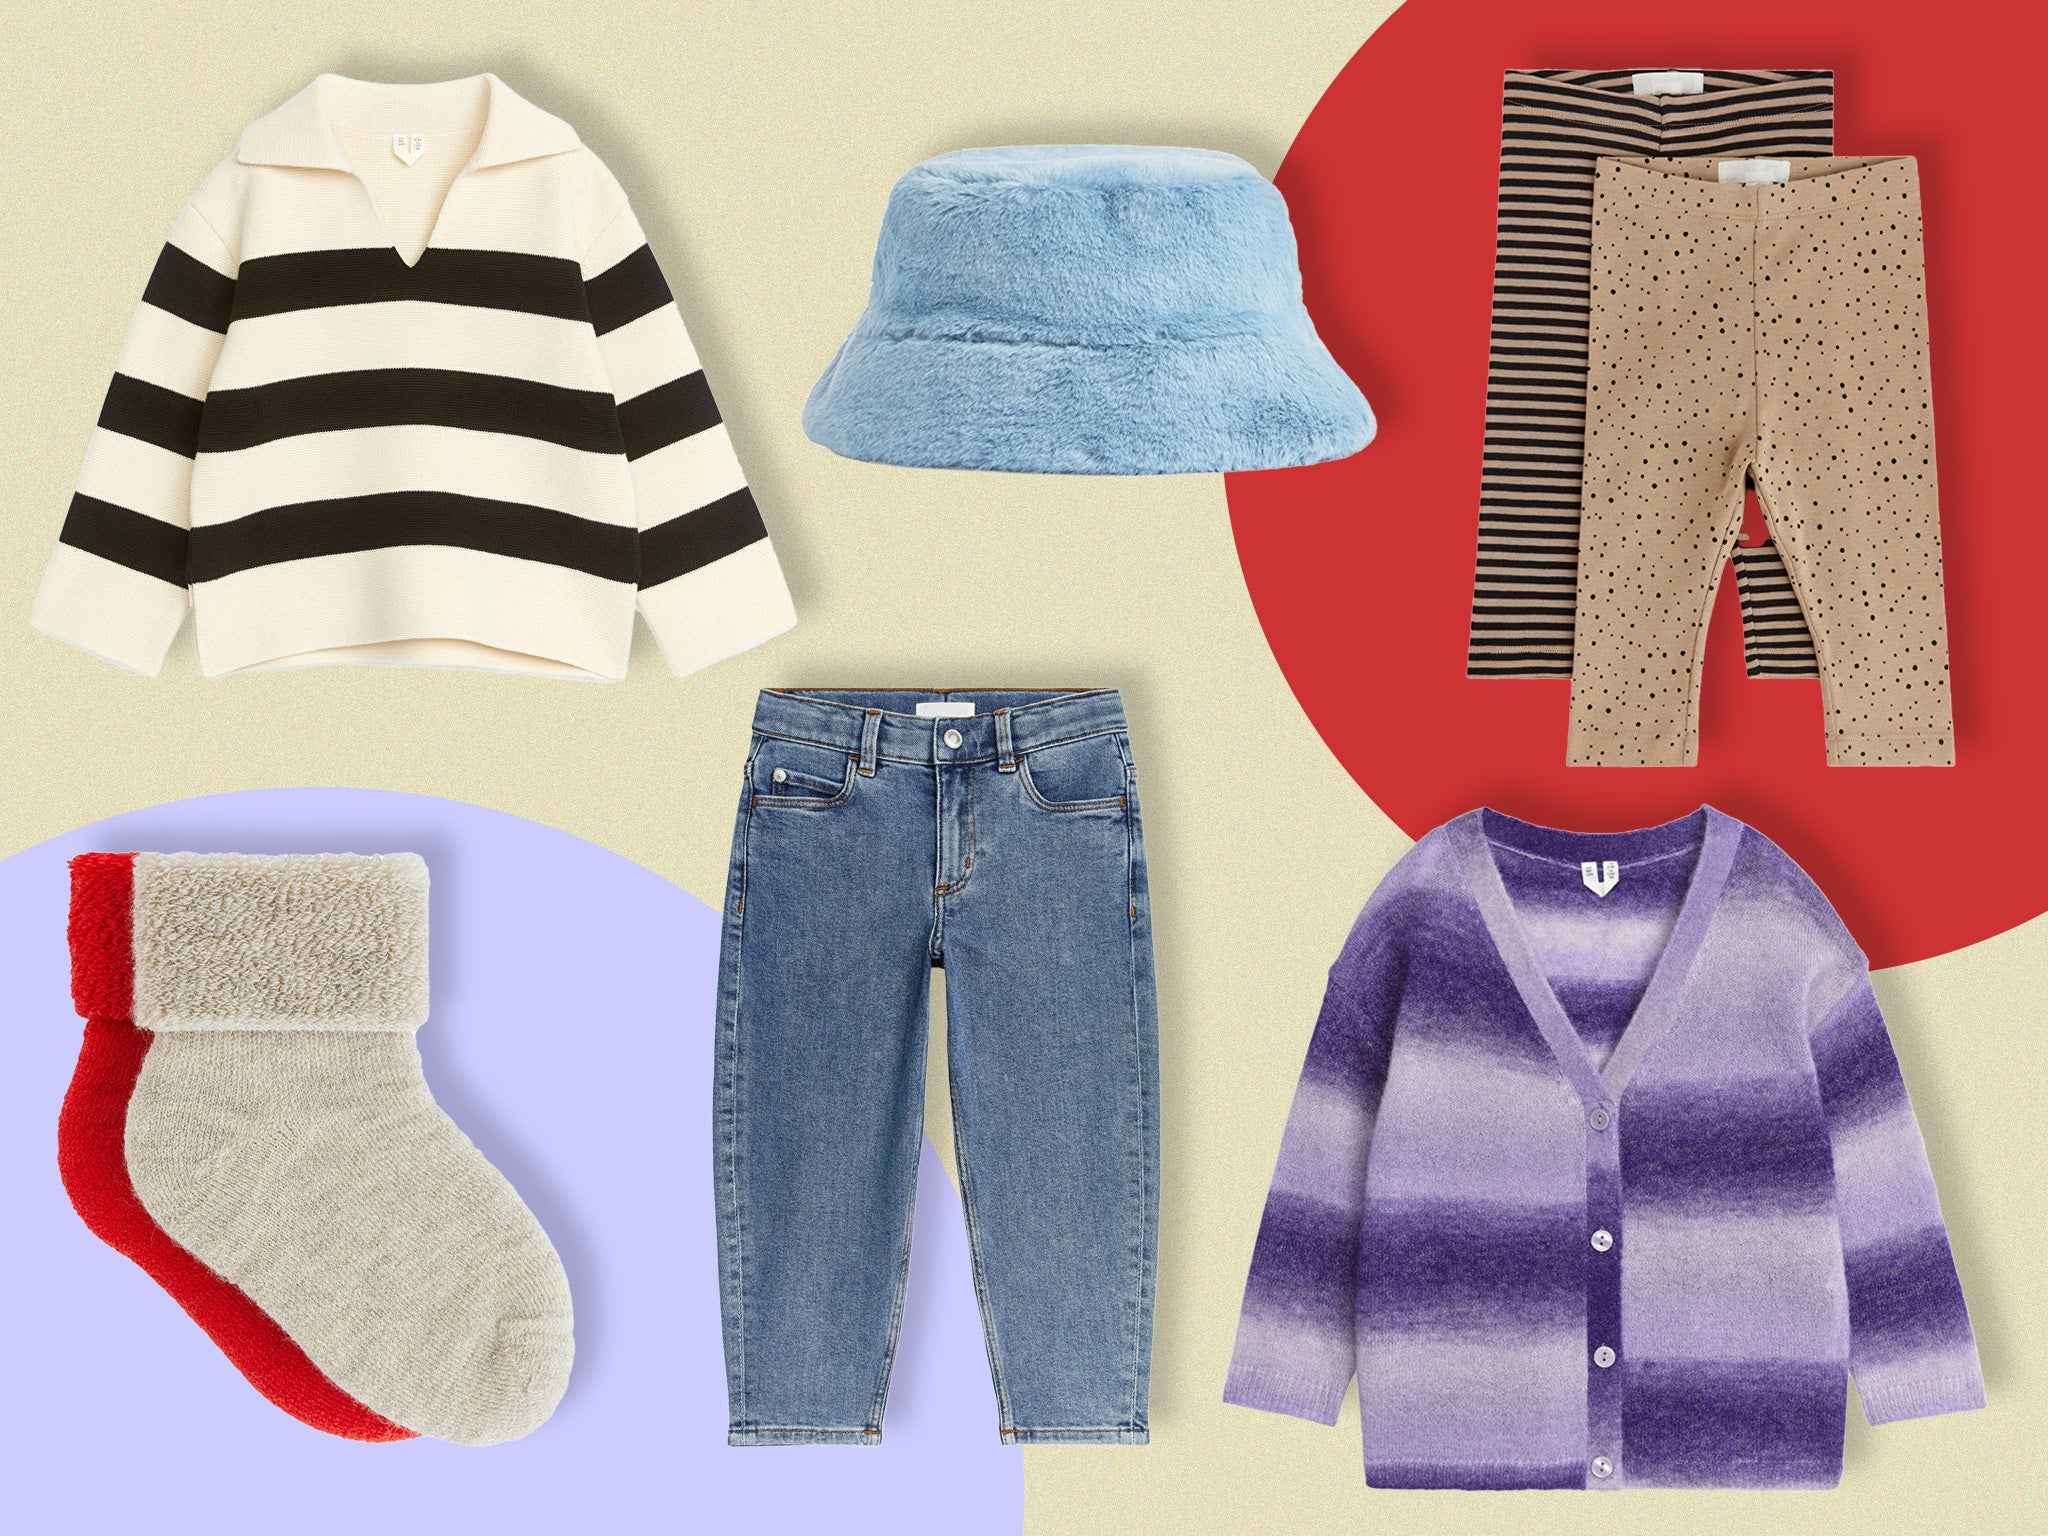 Arket’s kid and baby range is full of trendy gift ideas – here’s our pick of what to shop